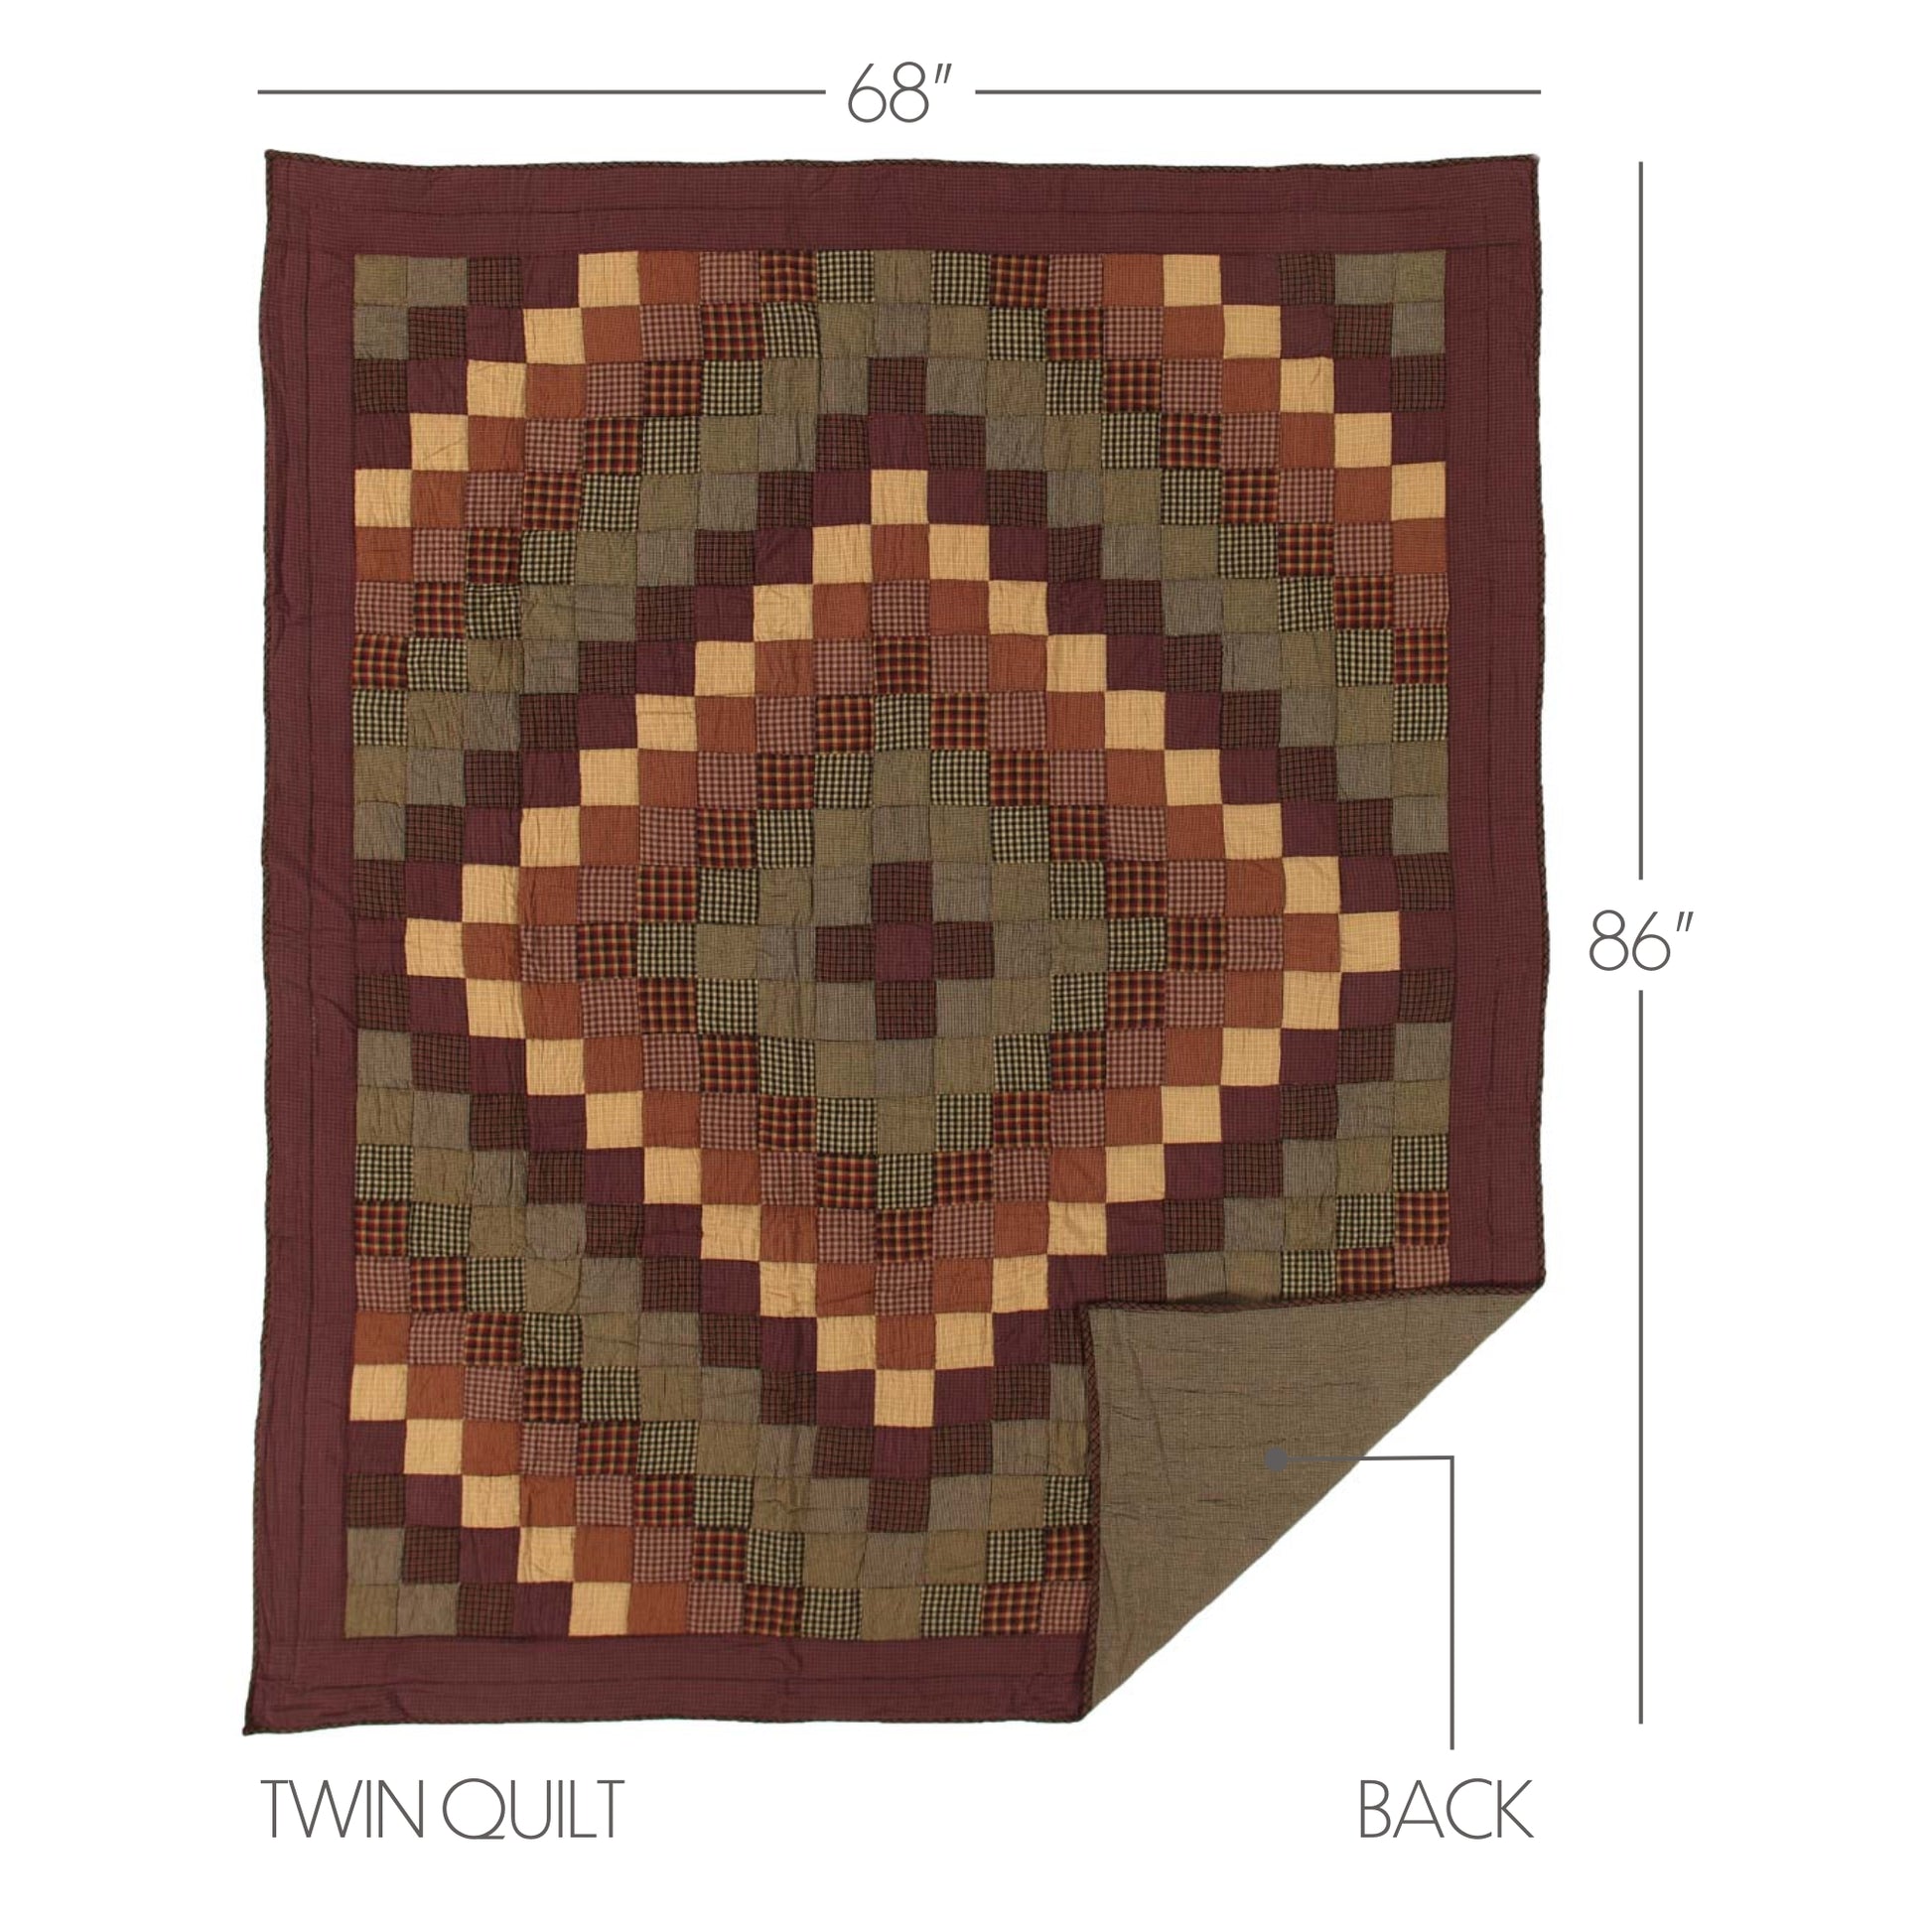 37907-Heritage-Farms-Twin-Quilt-68Wx86L-image-1